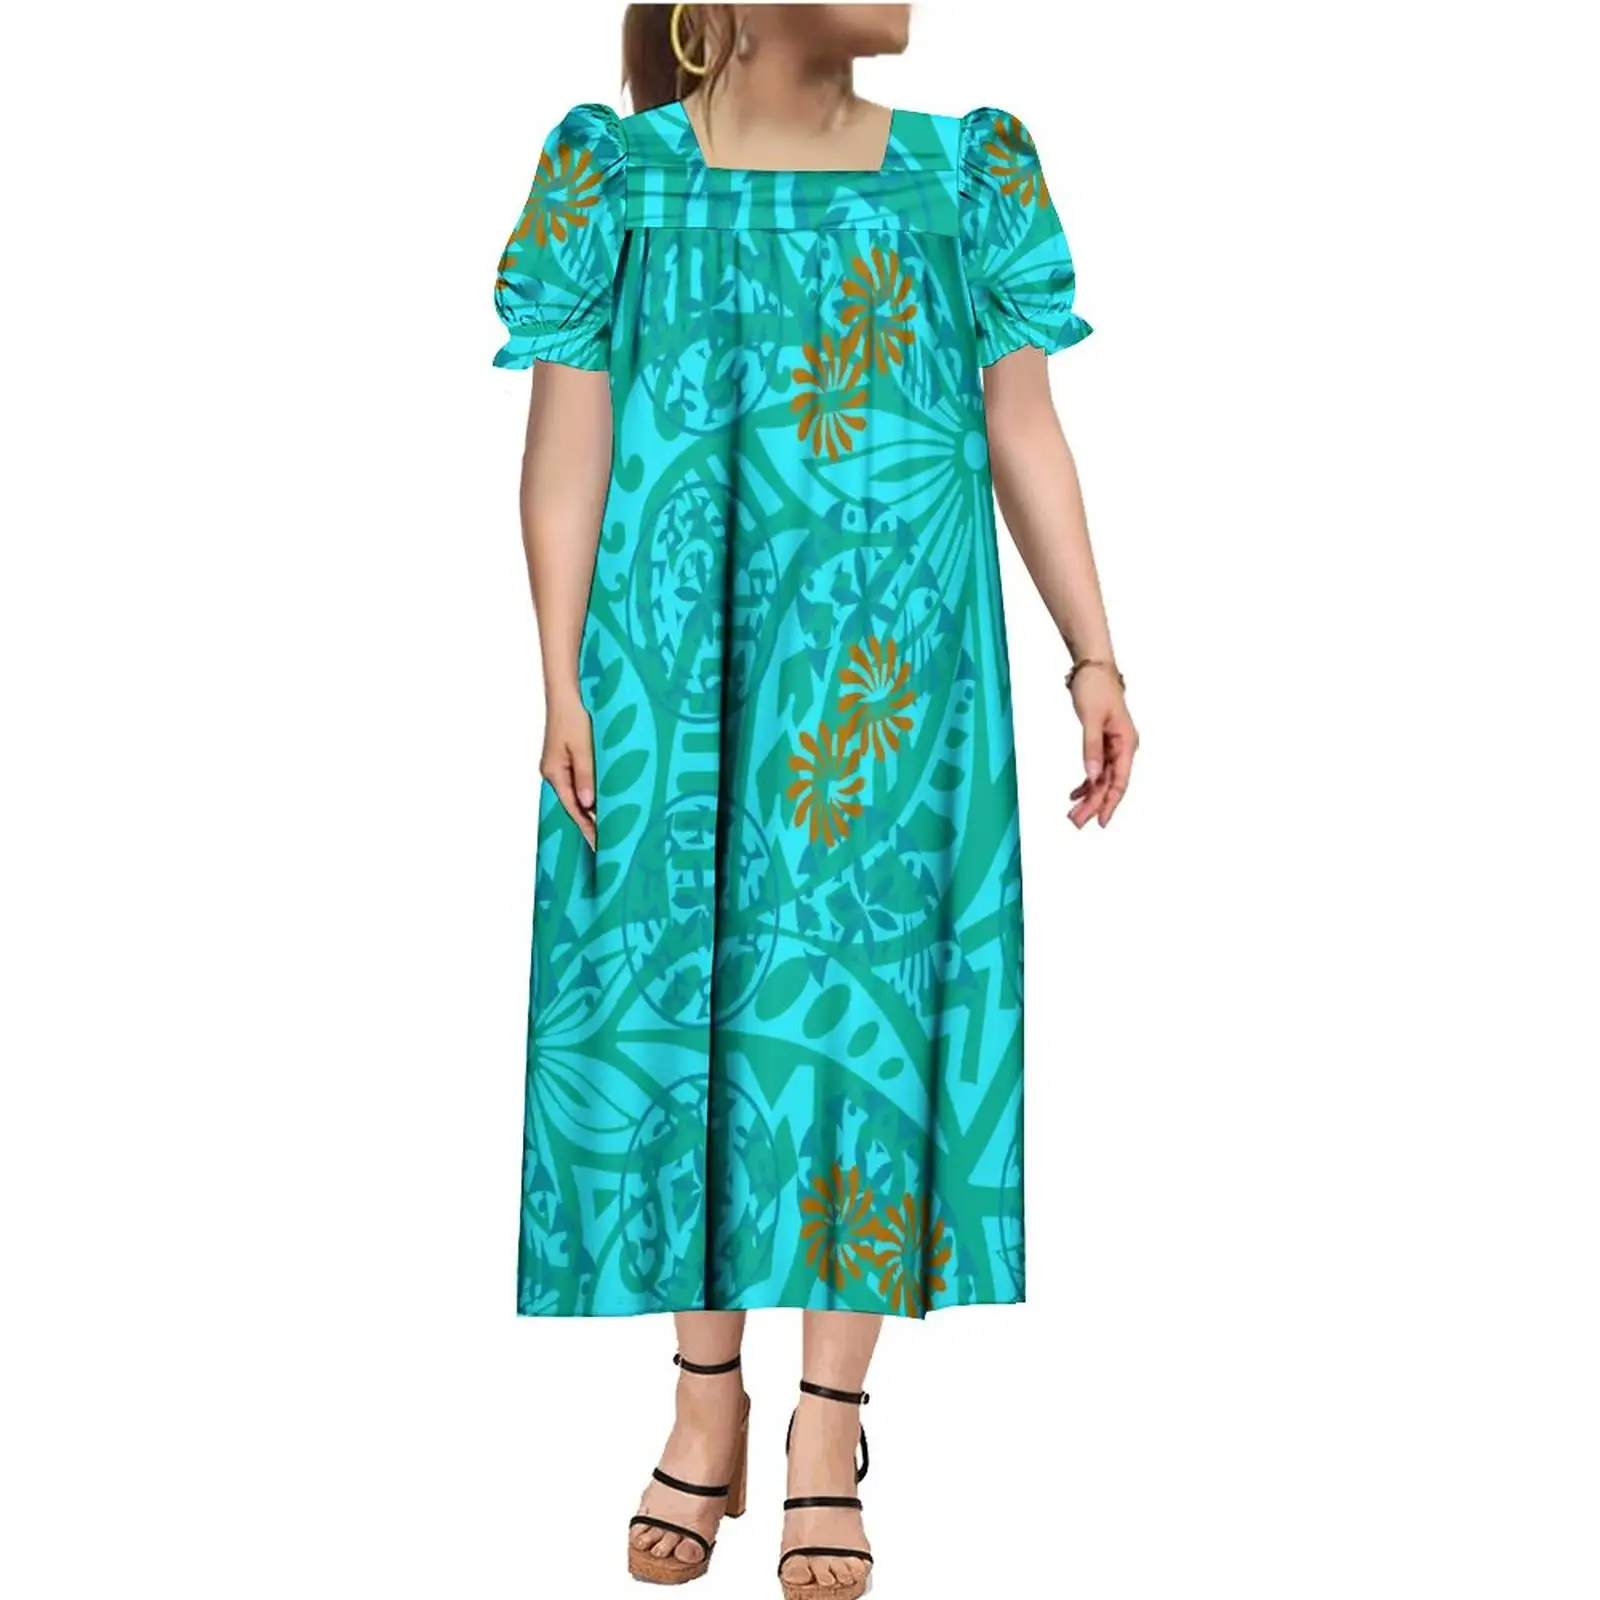 Hot Selling Pacific Island Art Tribal Design Trendy Muumuu Design Women Dresses High Quality Party Dress Factory Outlet